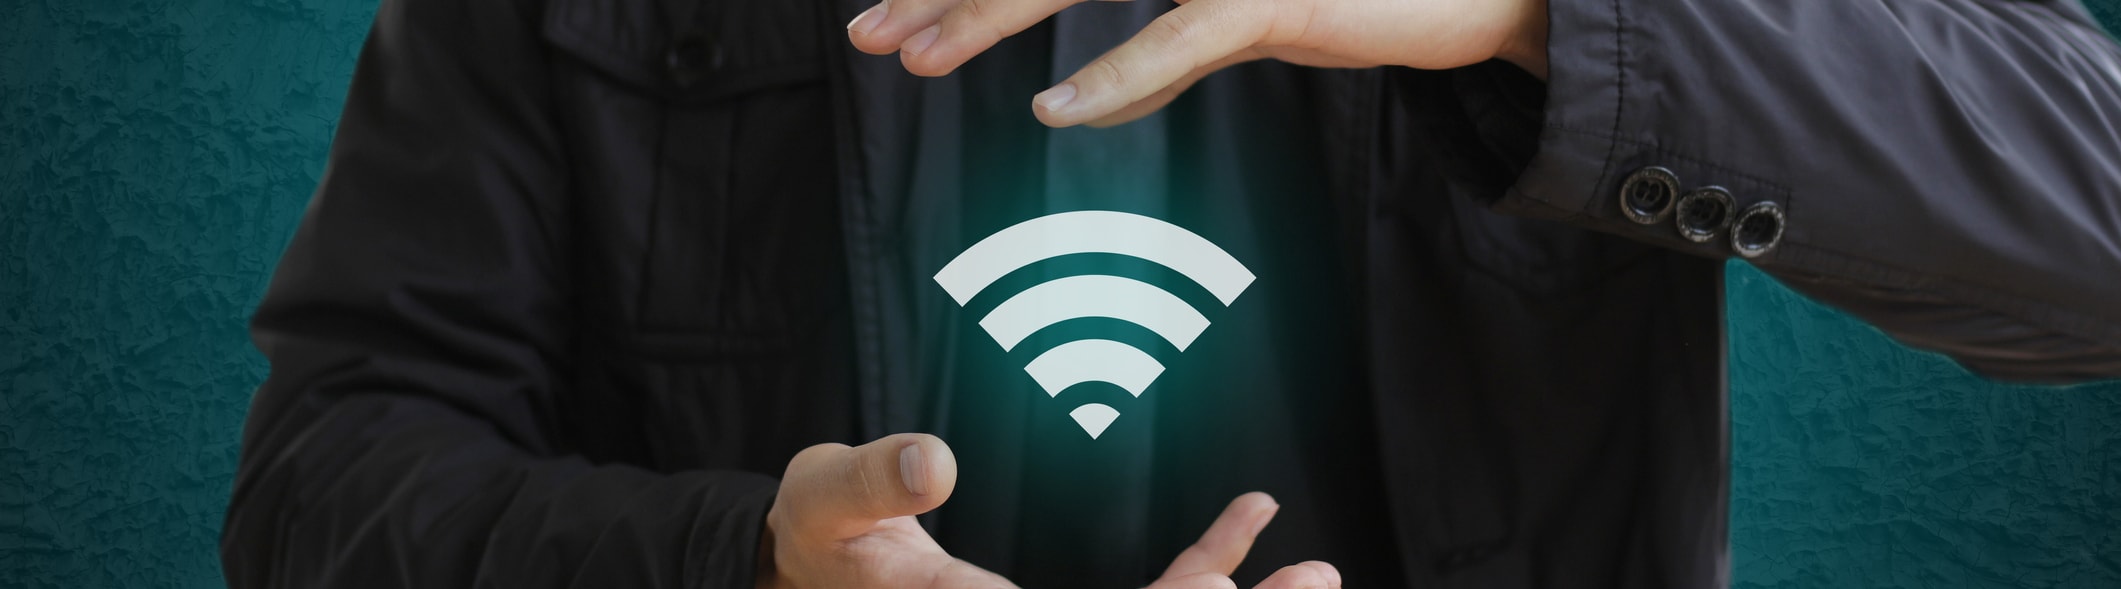 hands with WiFi icon